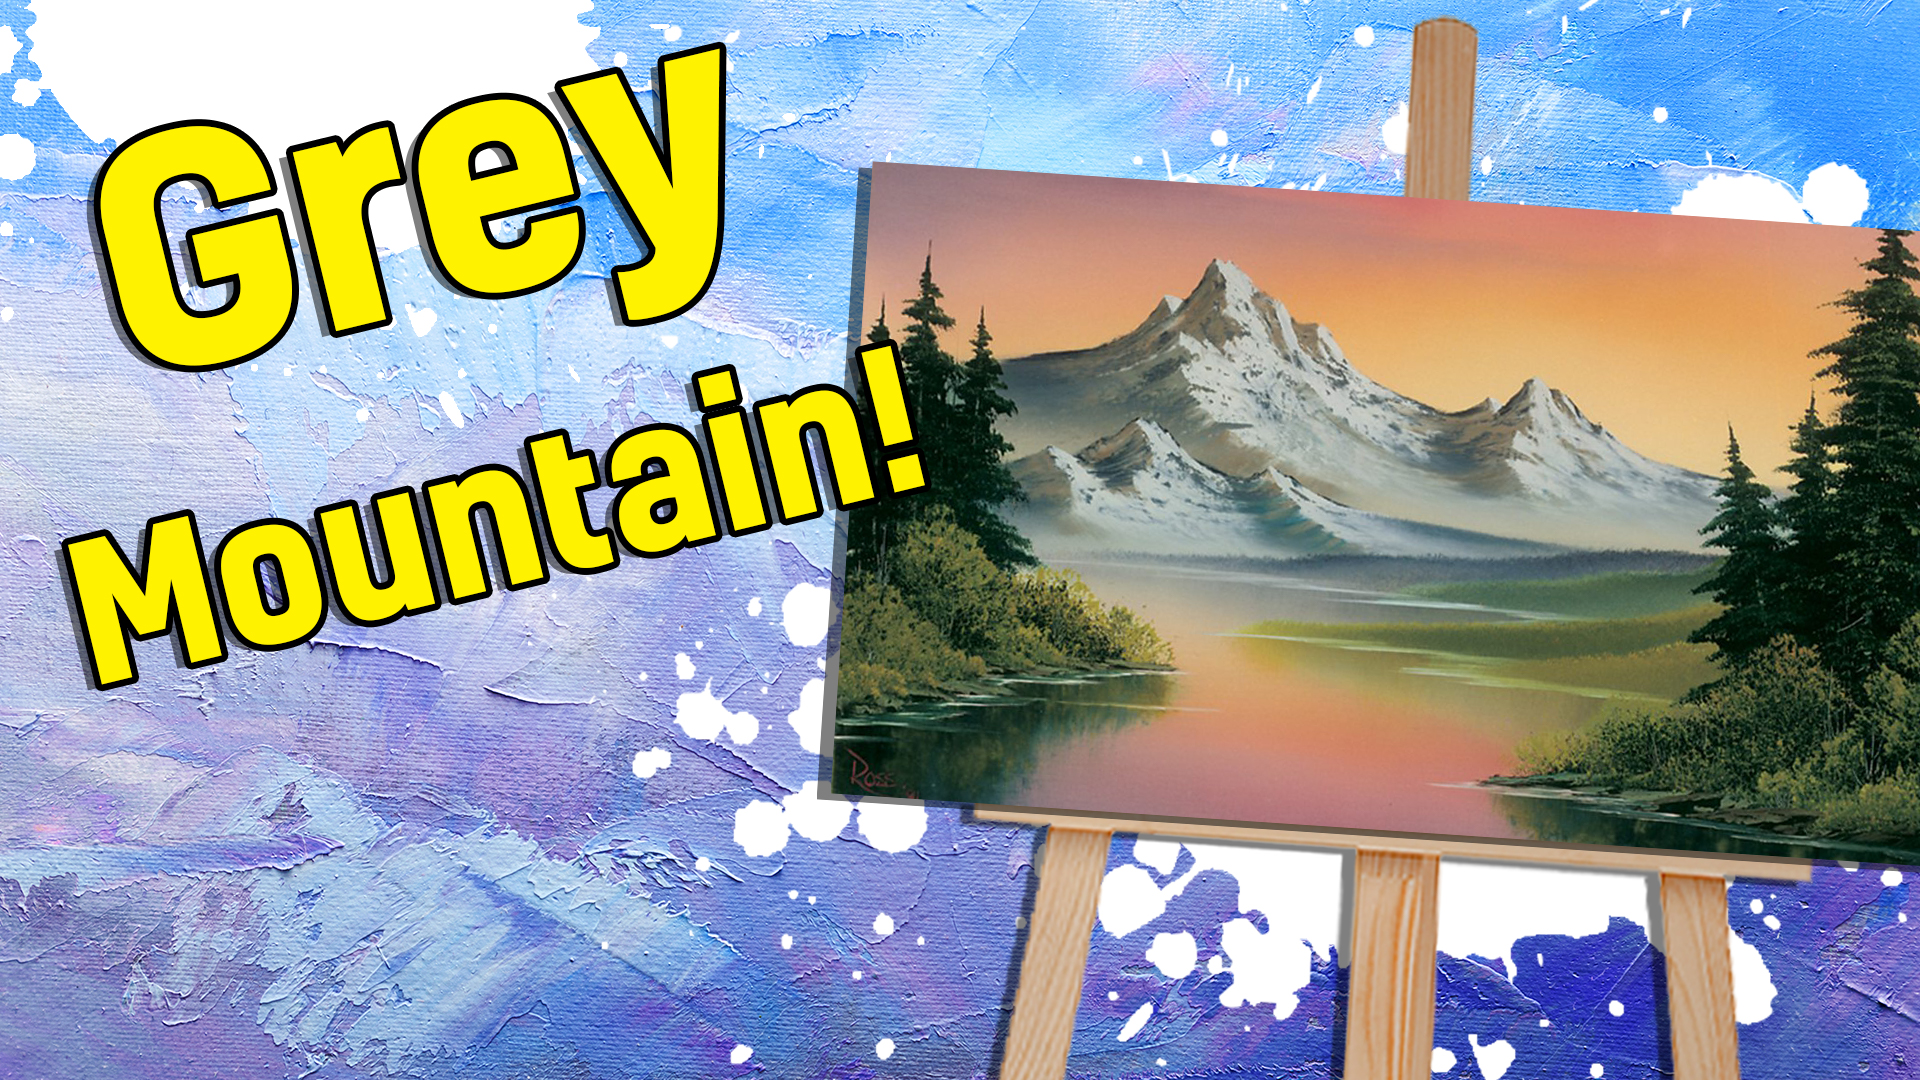 Result: Grey Mountain